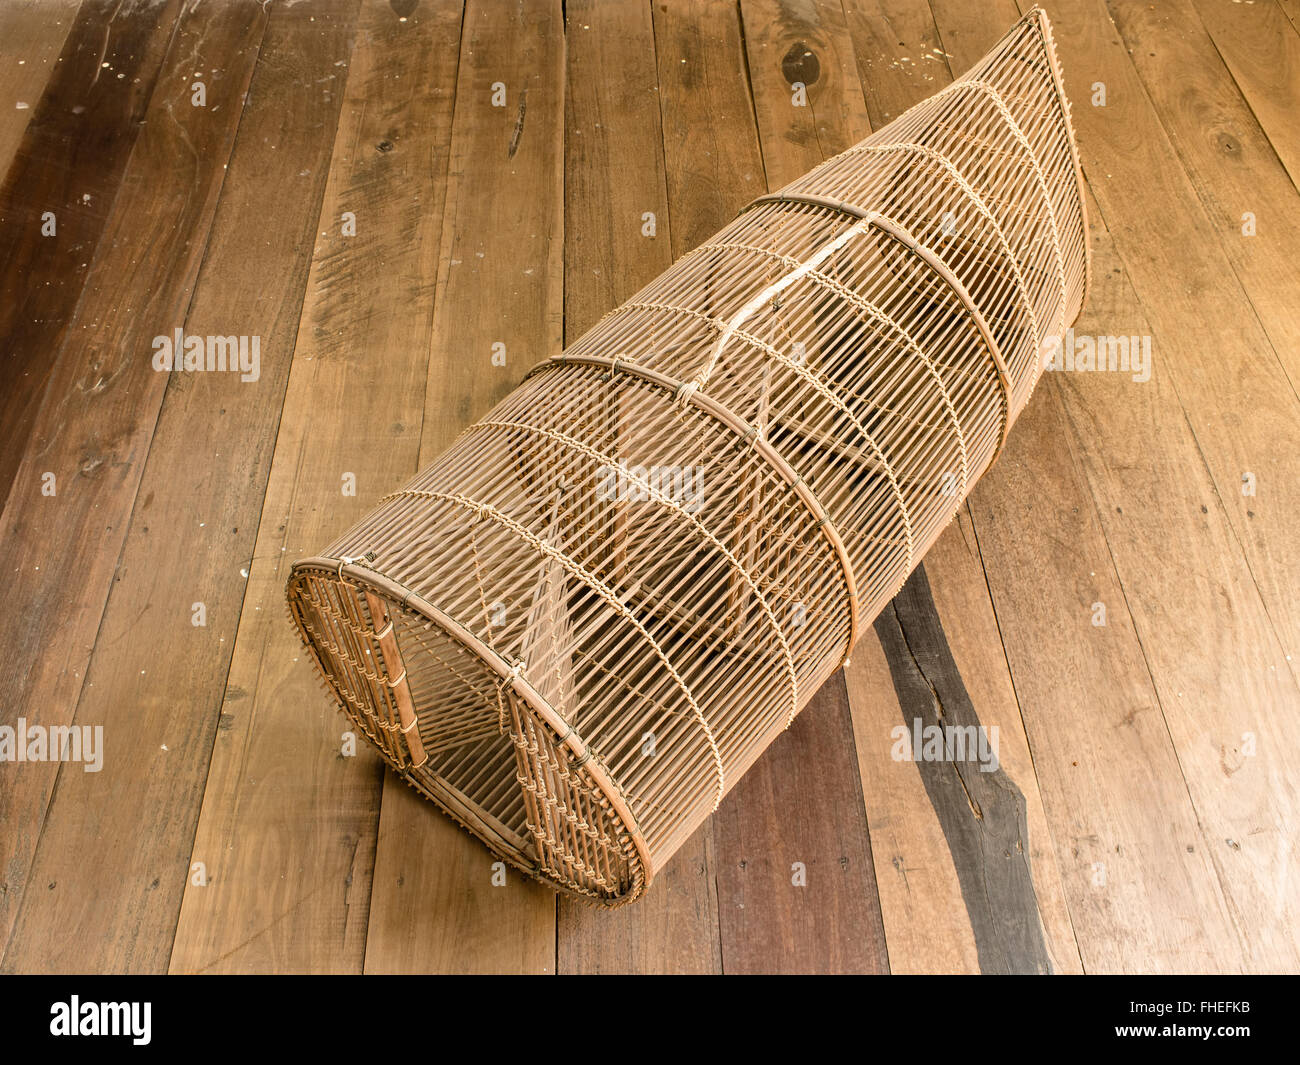 The fish trap in thailand style Stock Photo - Alamy